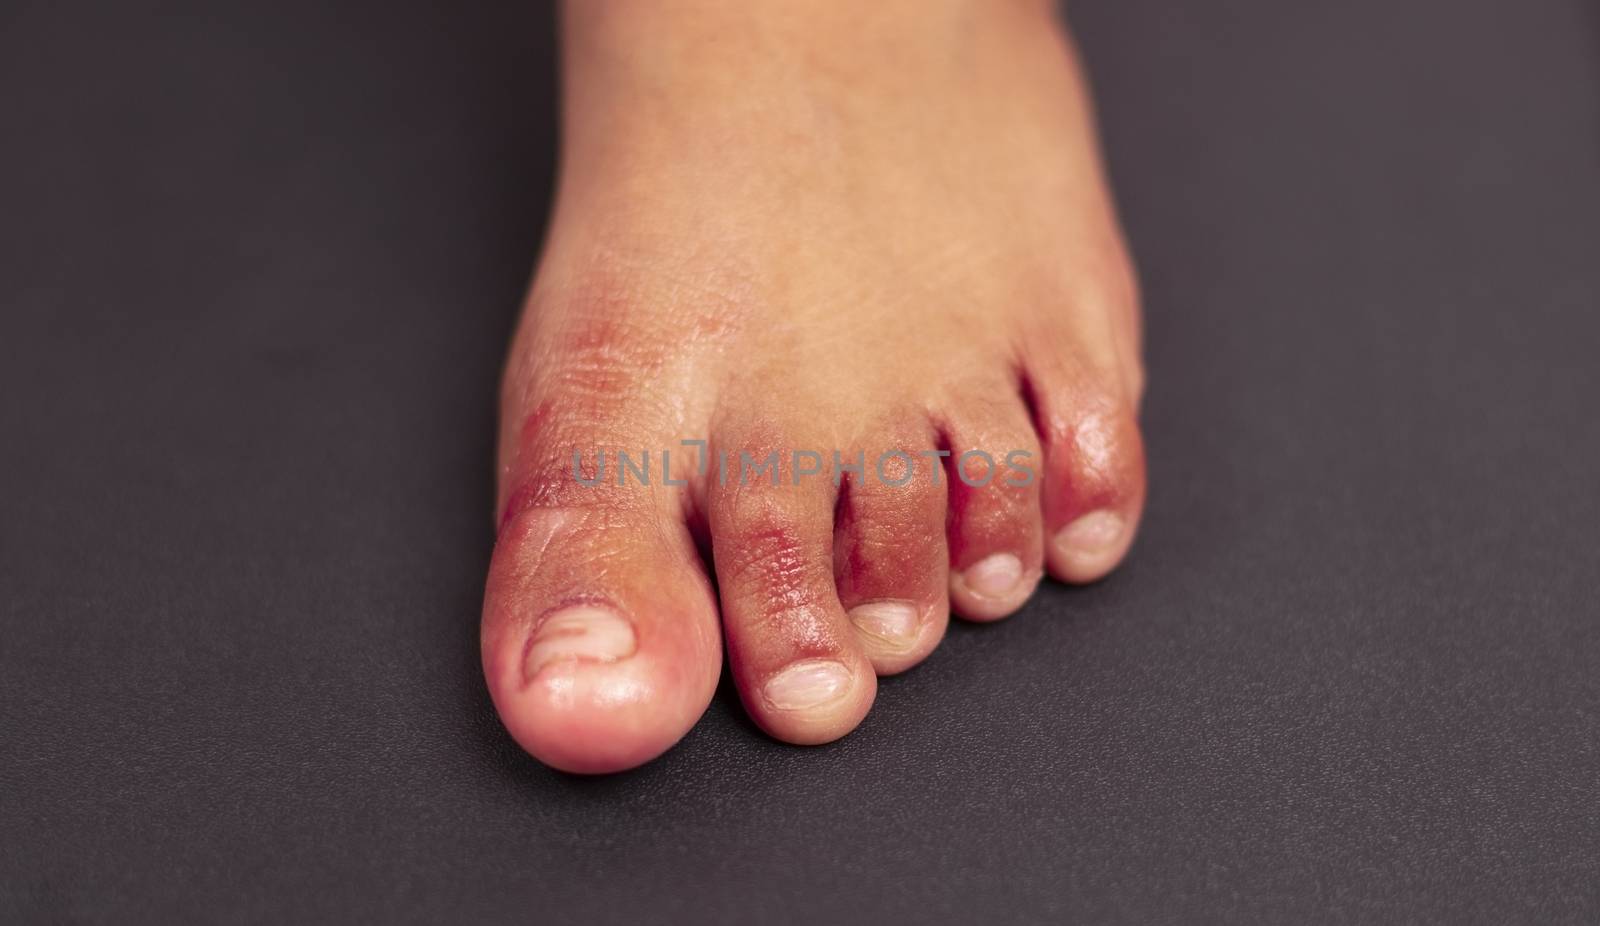 Painful red inflammation on toe called covid toe lesions strange sign of new coronavirus symptoms or infections by lakshmiprasad.maski@gmai.com